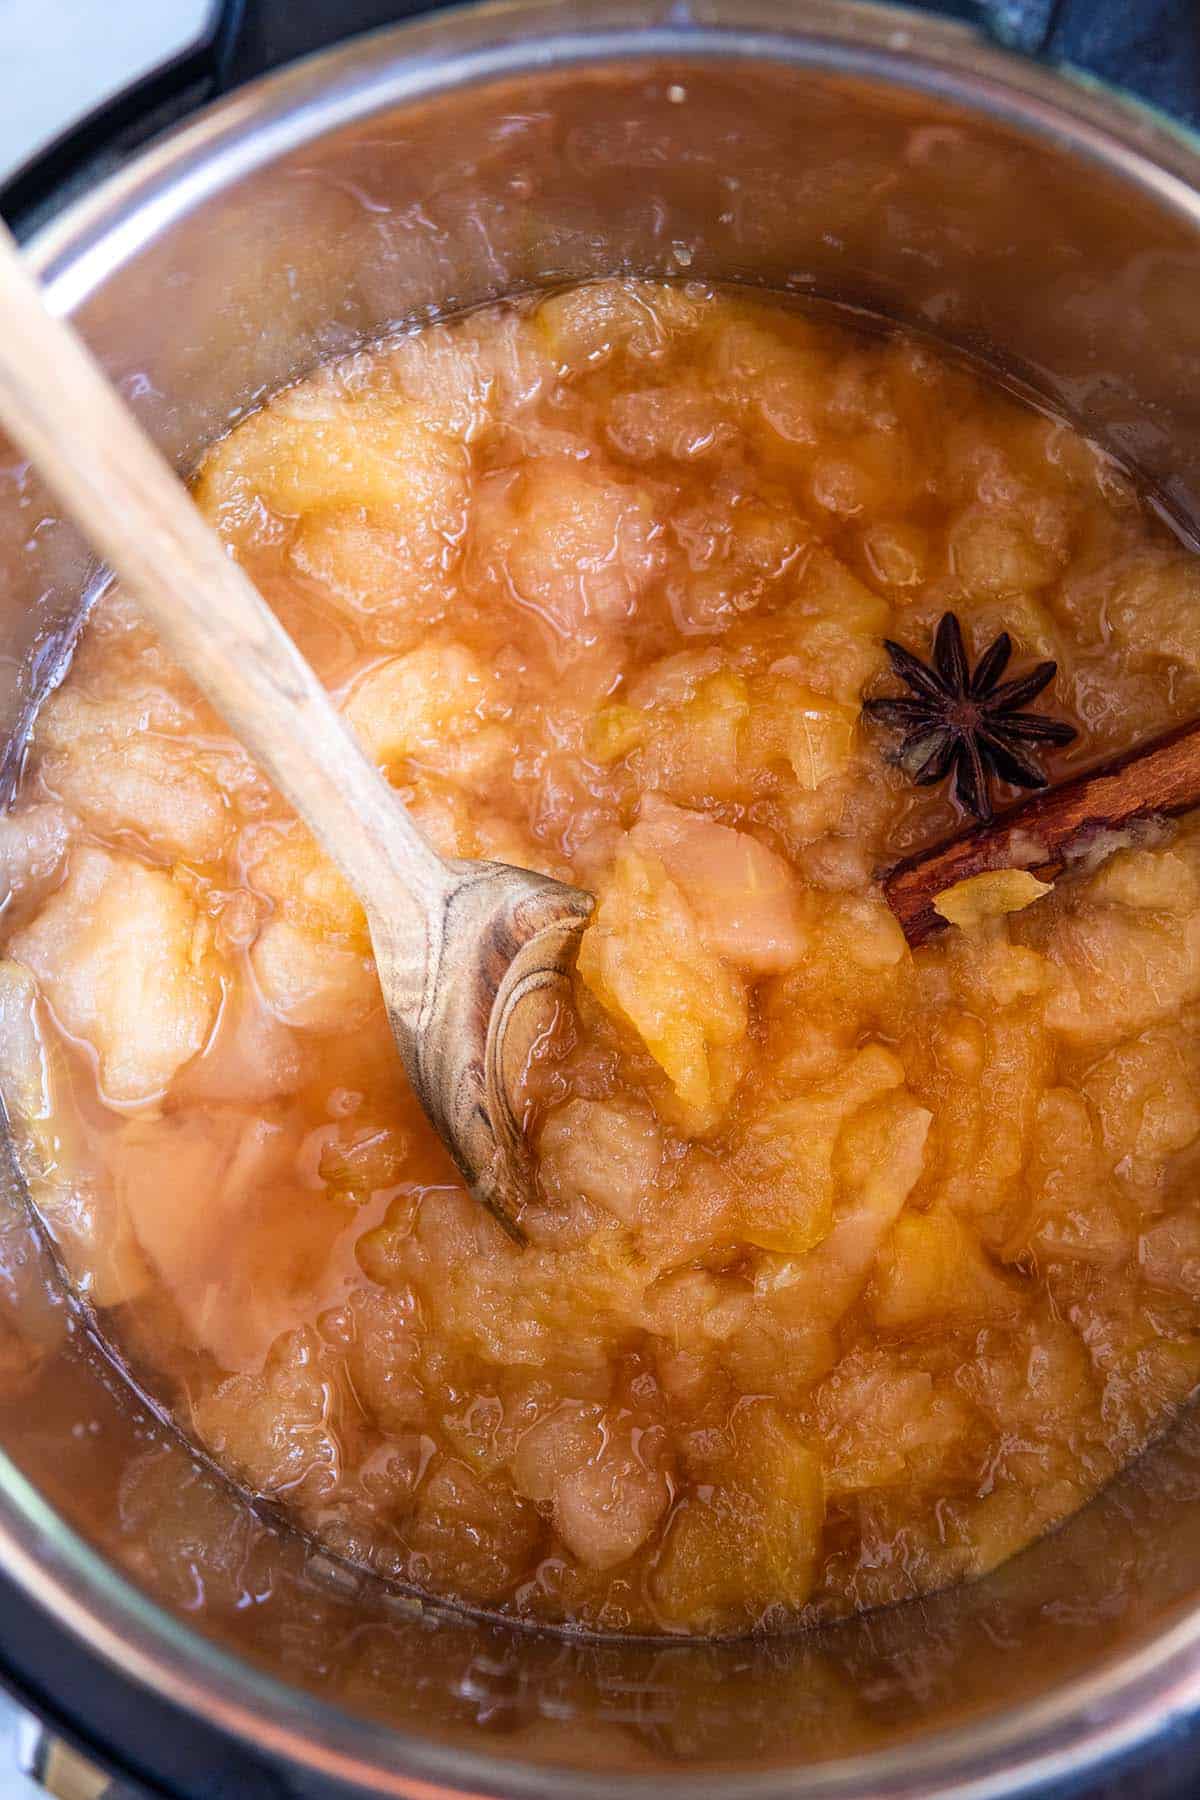 How to Make Instant Pot Applesauce